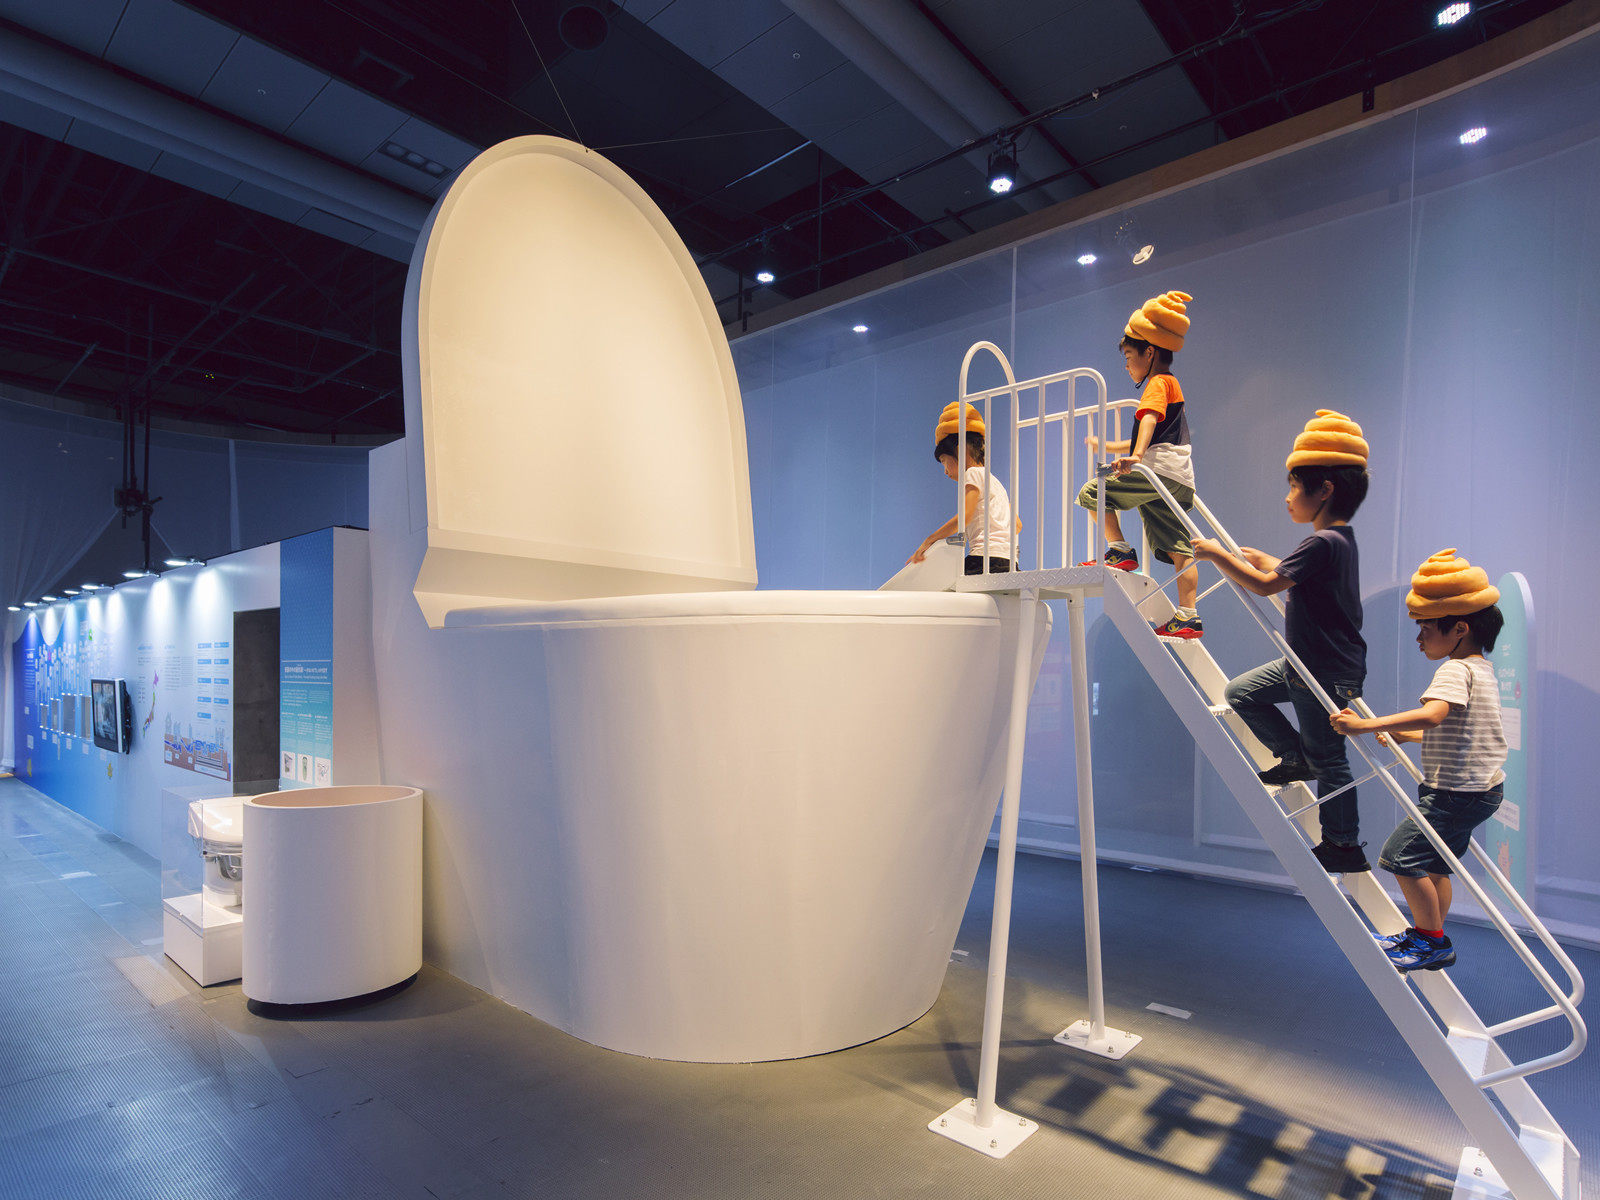 Japanese children wearing feces-shaped hats line up to slide down into a giant toilet, simulating the magical journey of human waste matter through a virtual sewer world, at a toilet exhibition in Tokyo